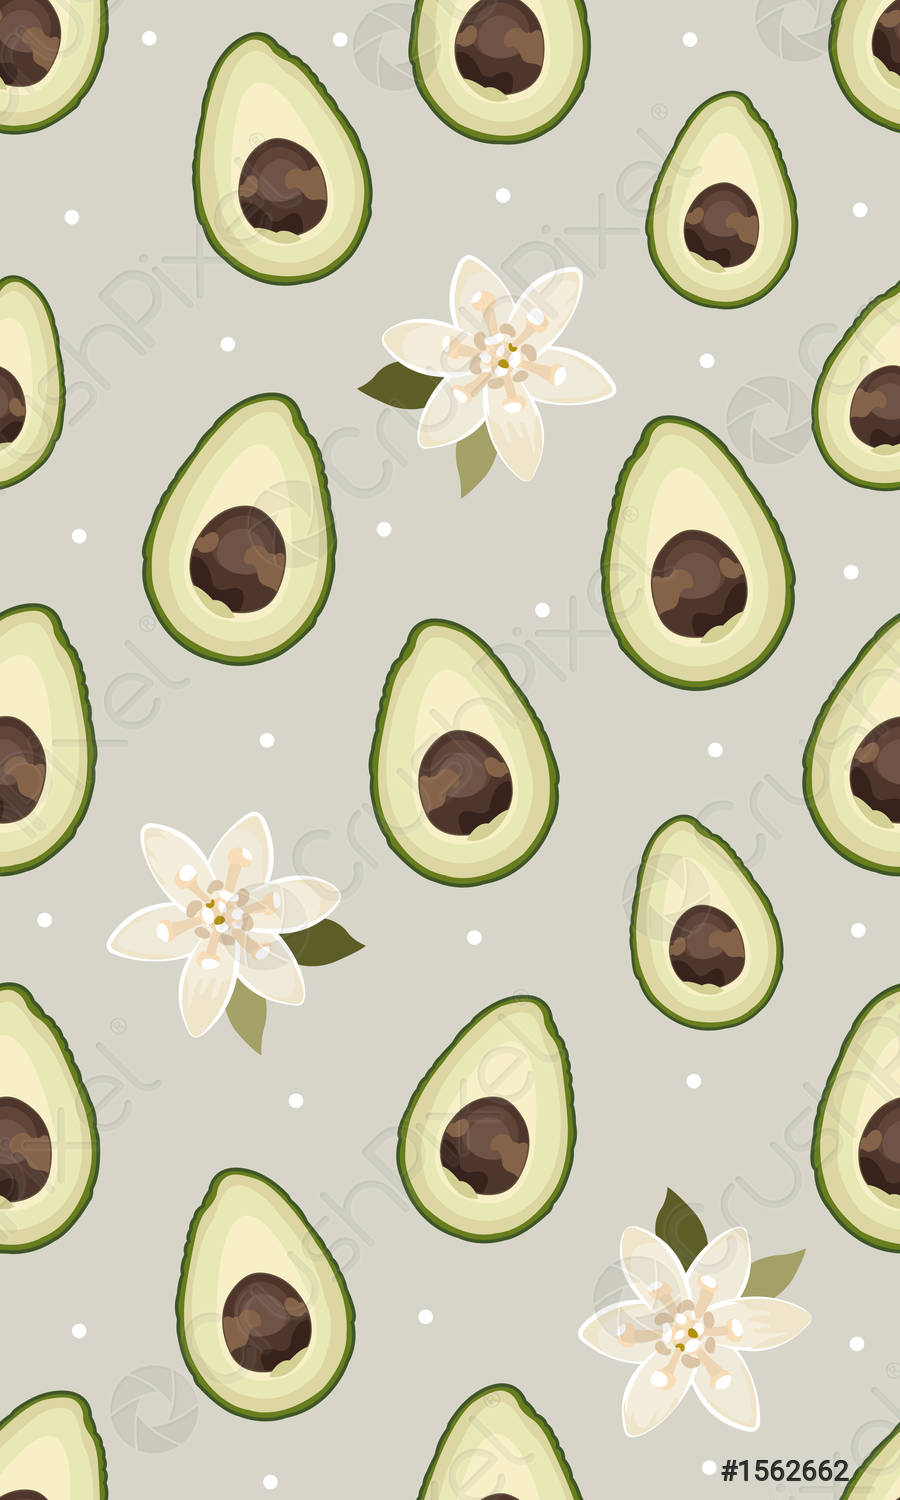 An avocado pattern with flowers on it - Avocado